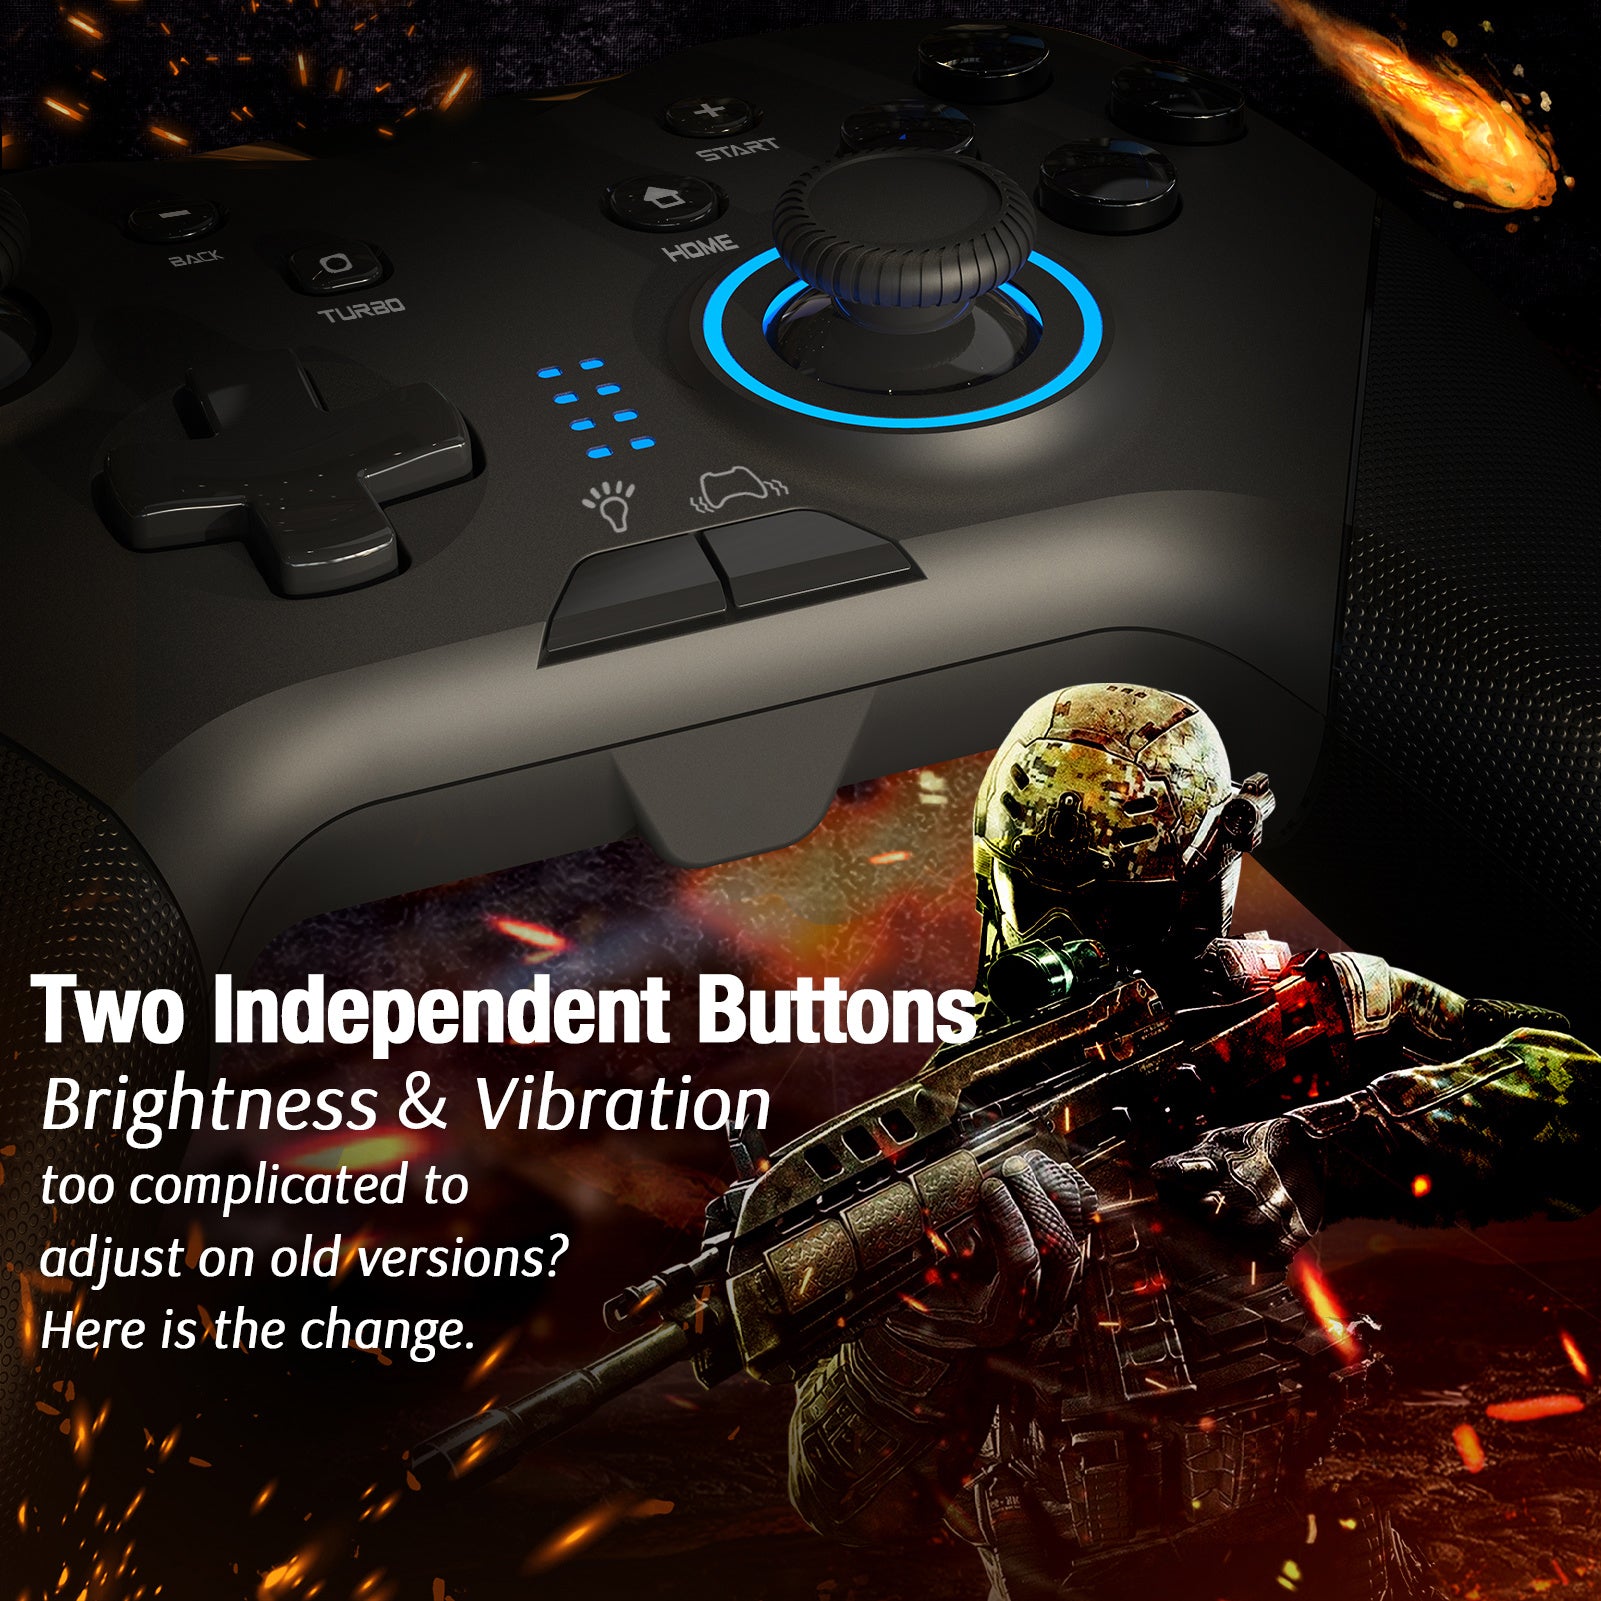 A Dual-Vibration PC Game Controller Compatible Windows 10/8/7 PC Laptop And TV Box with buttons on it, designed for enhanced gaming experience with vibrating motors.